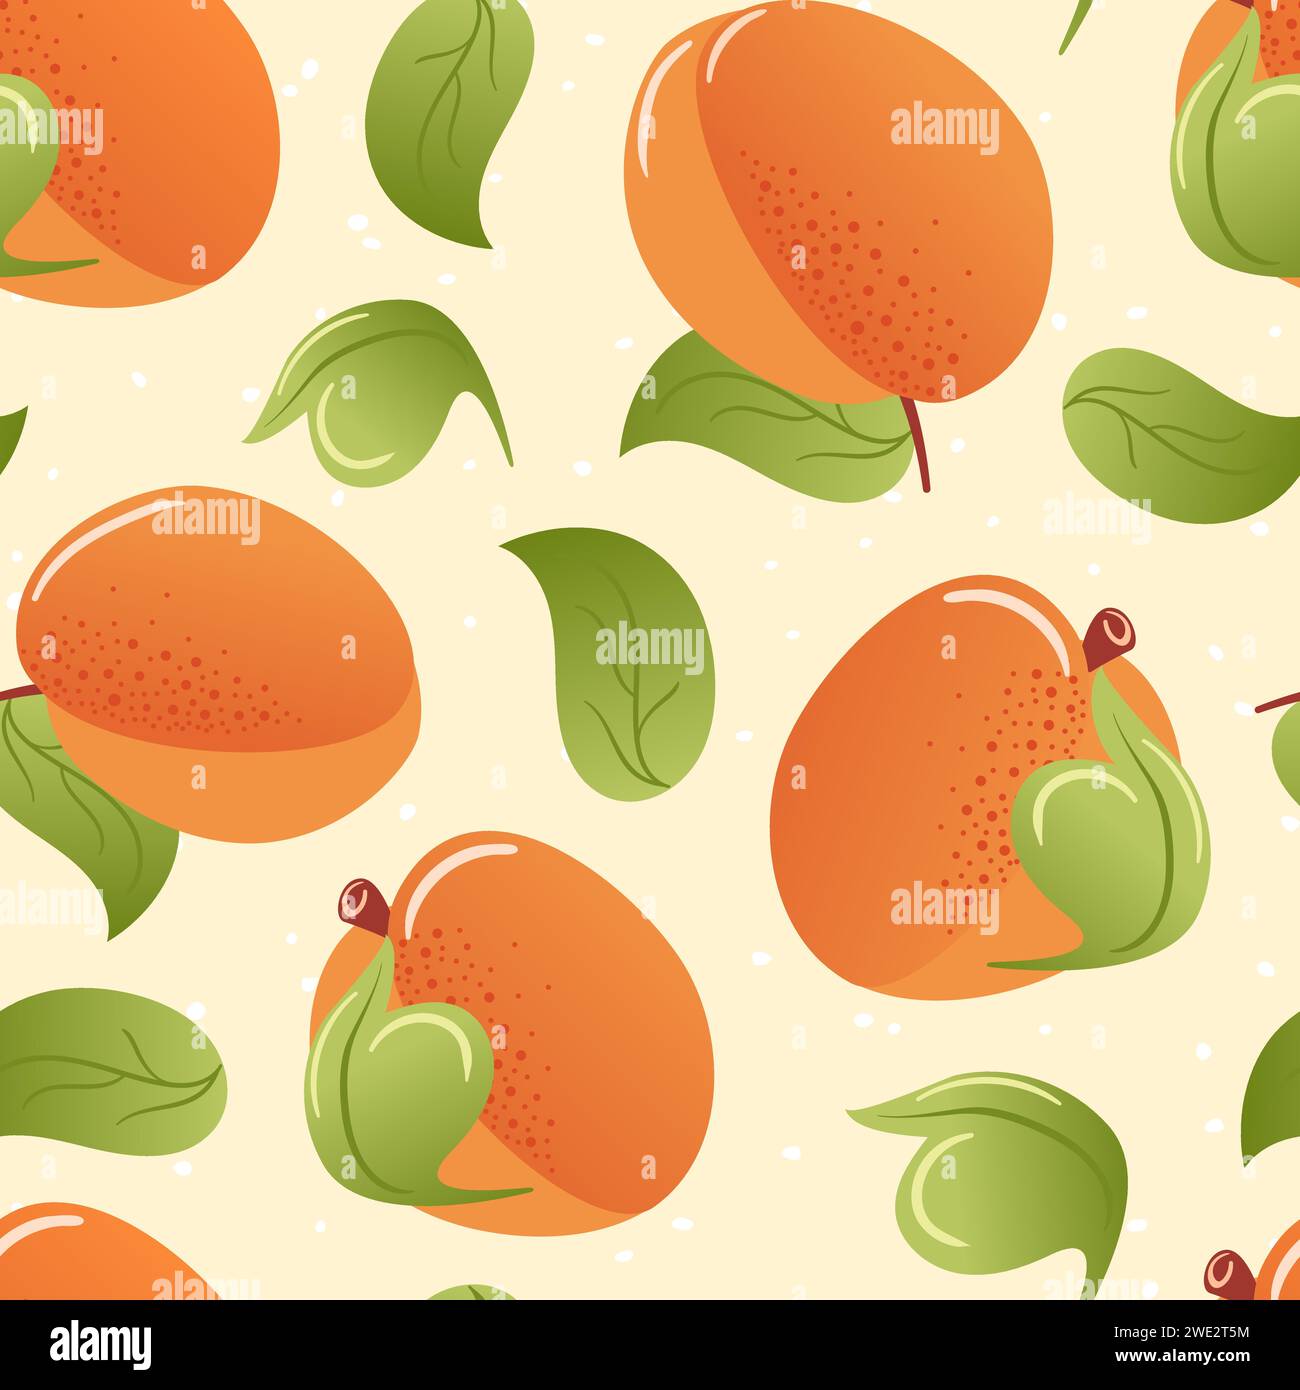 Peach summer seamless pattern in minimalistic style. Tropical exotic fruits, leaves. Healthy food. For menu, cafe, wallpaper, fabric background Stock Vector